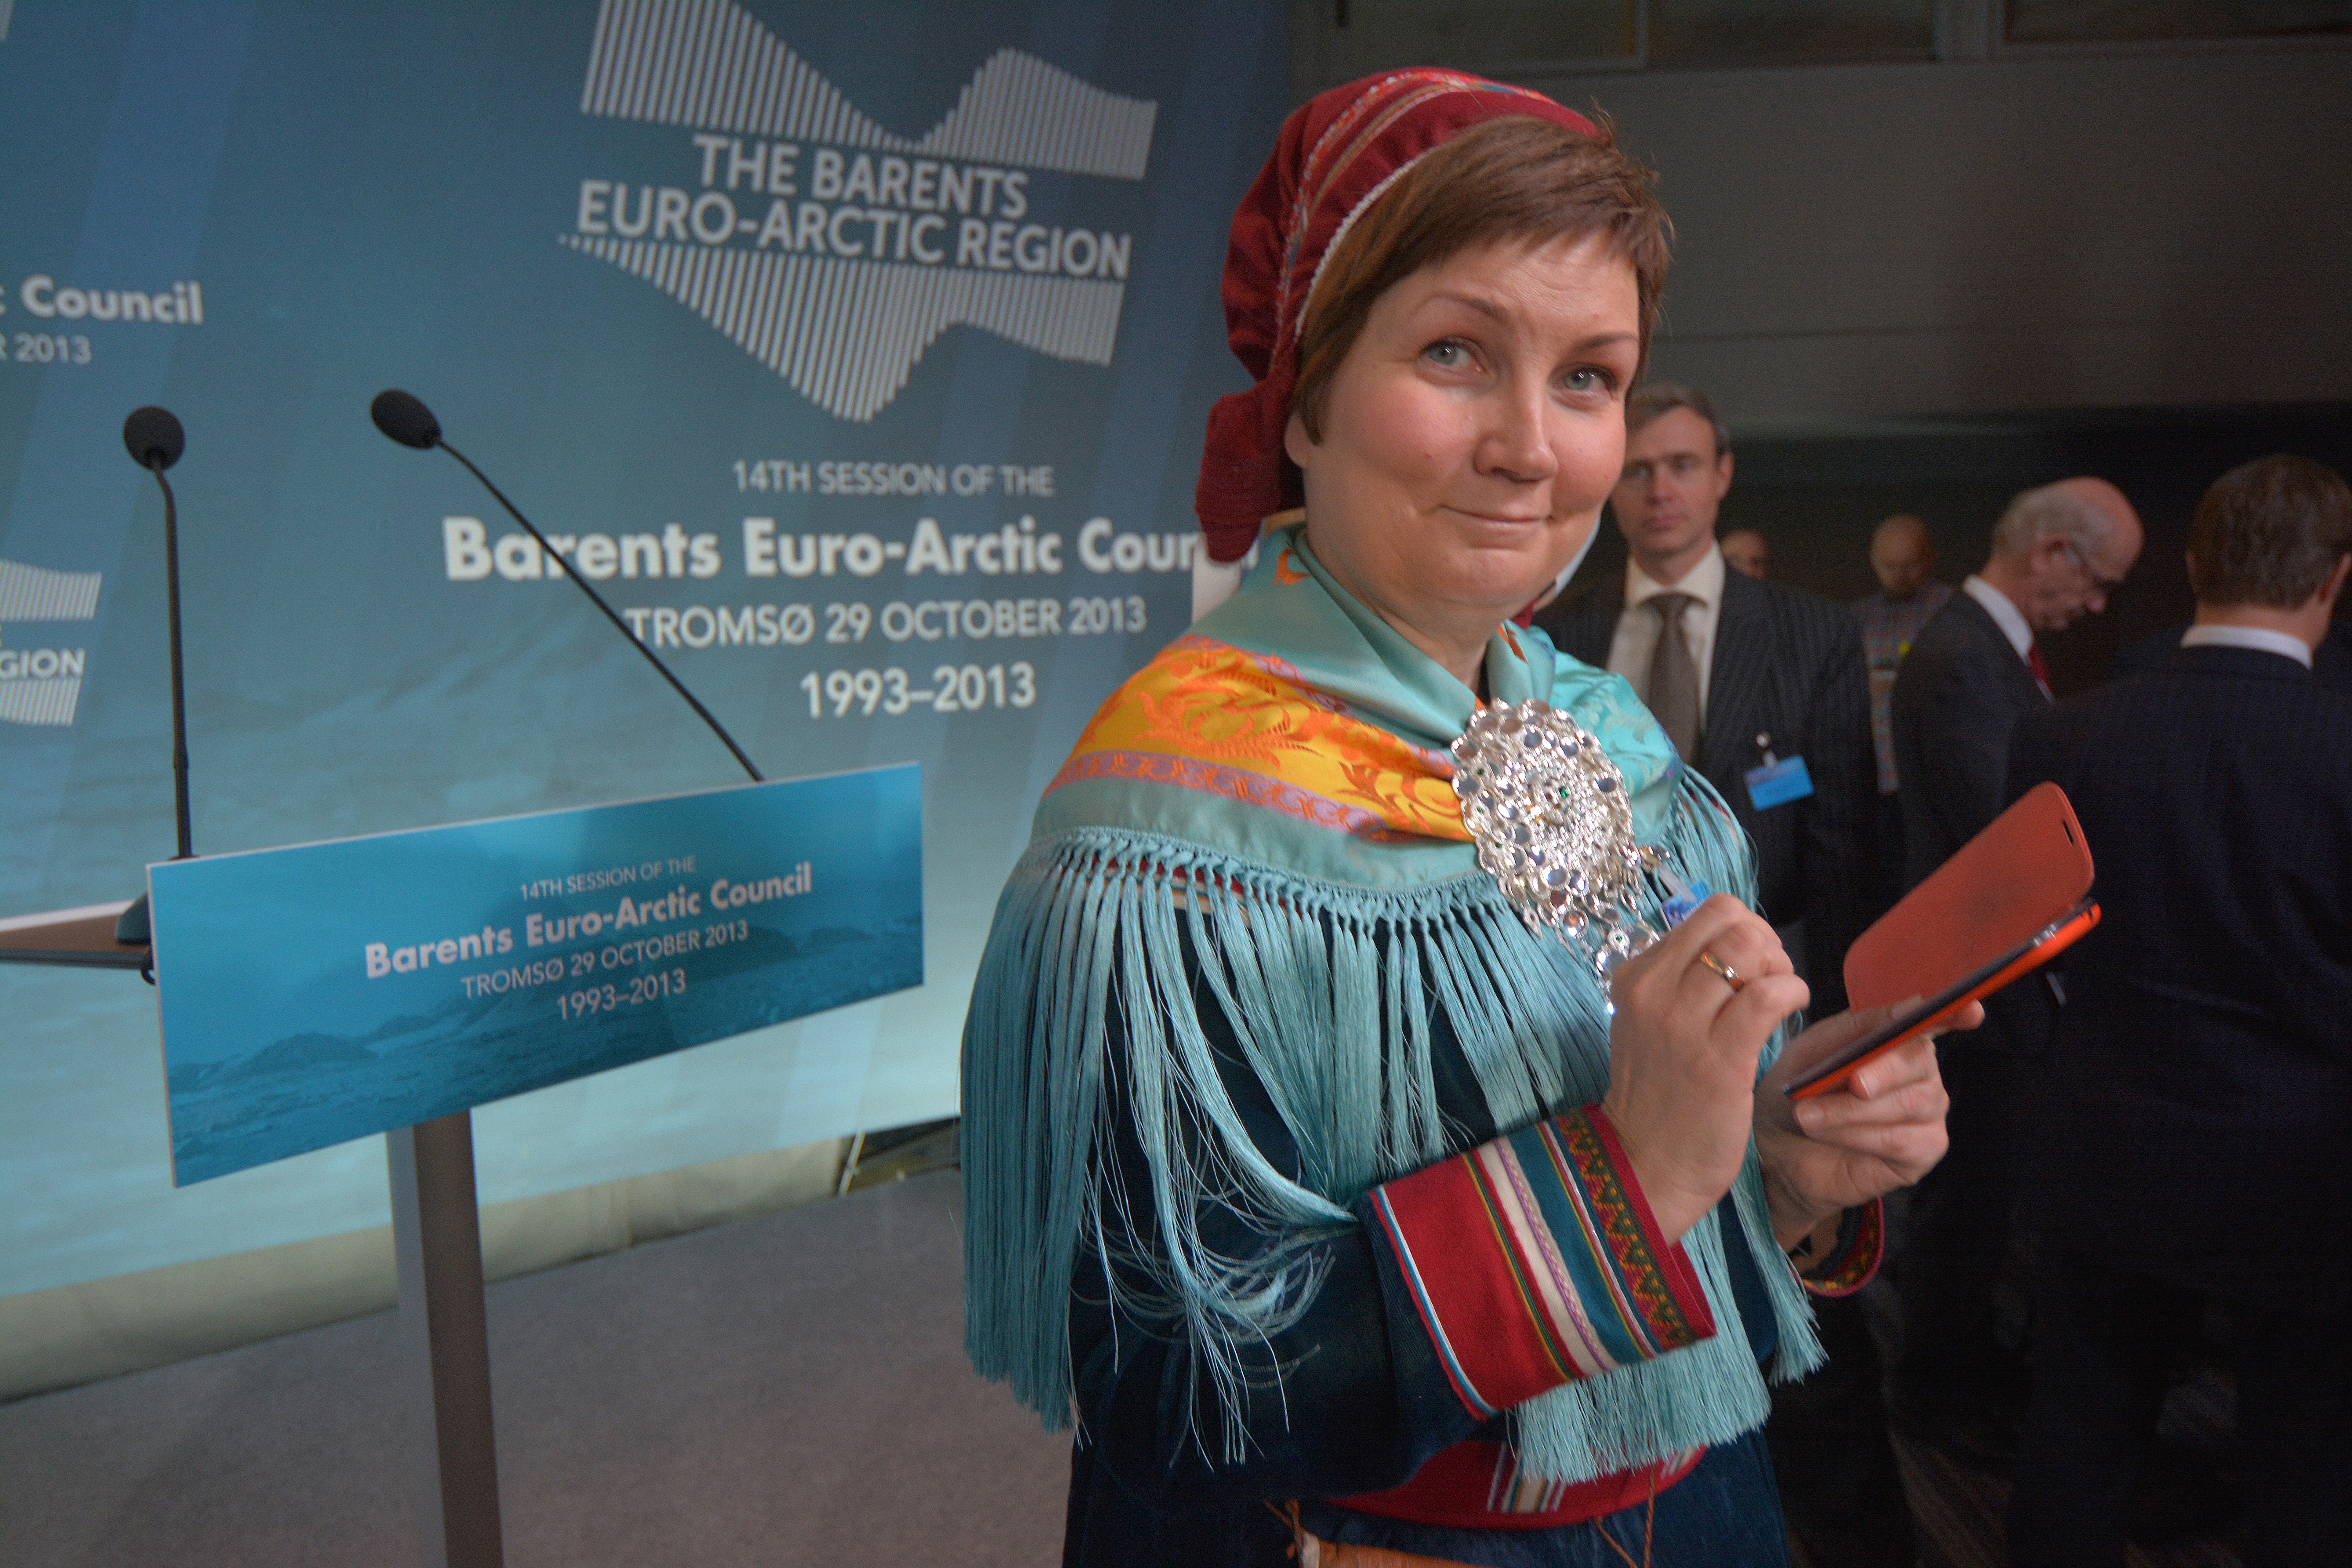 Outgoing president Aili Keskitalo at the Barents Council metting in Tromsø 2013. (Thomas Nilsen / The Independent Barents Observer)